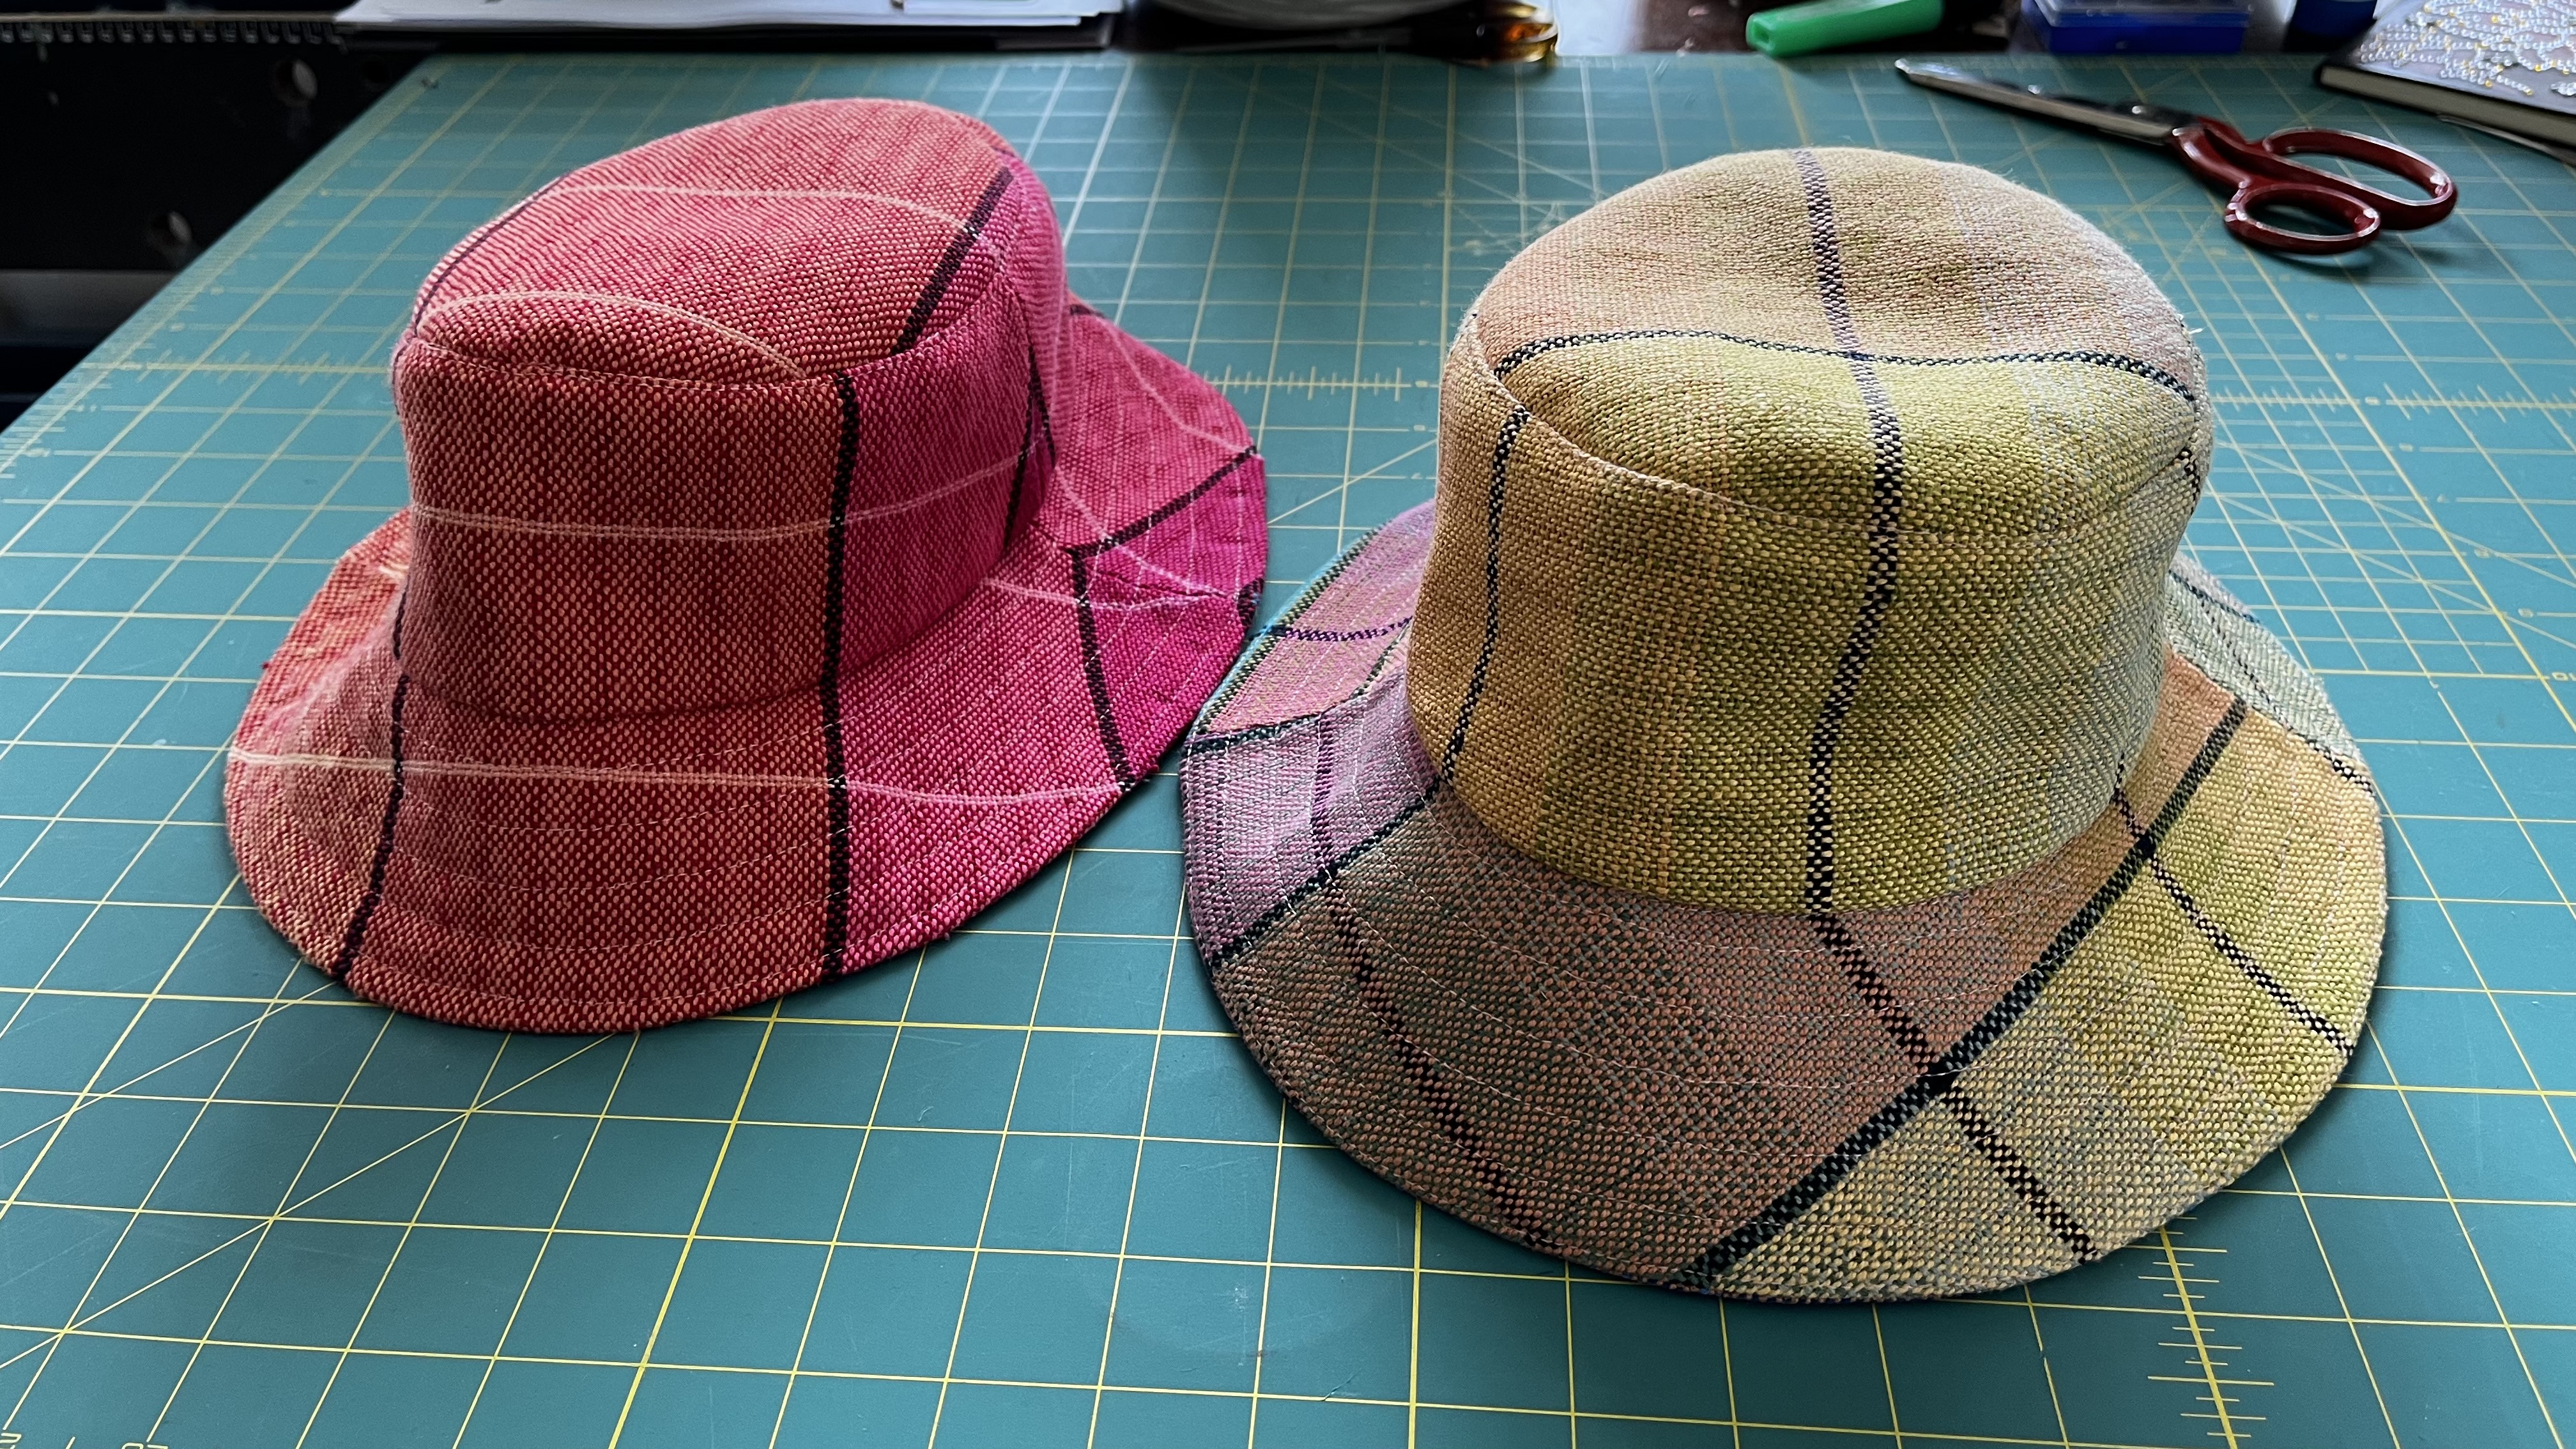 Hats off to handwoven